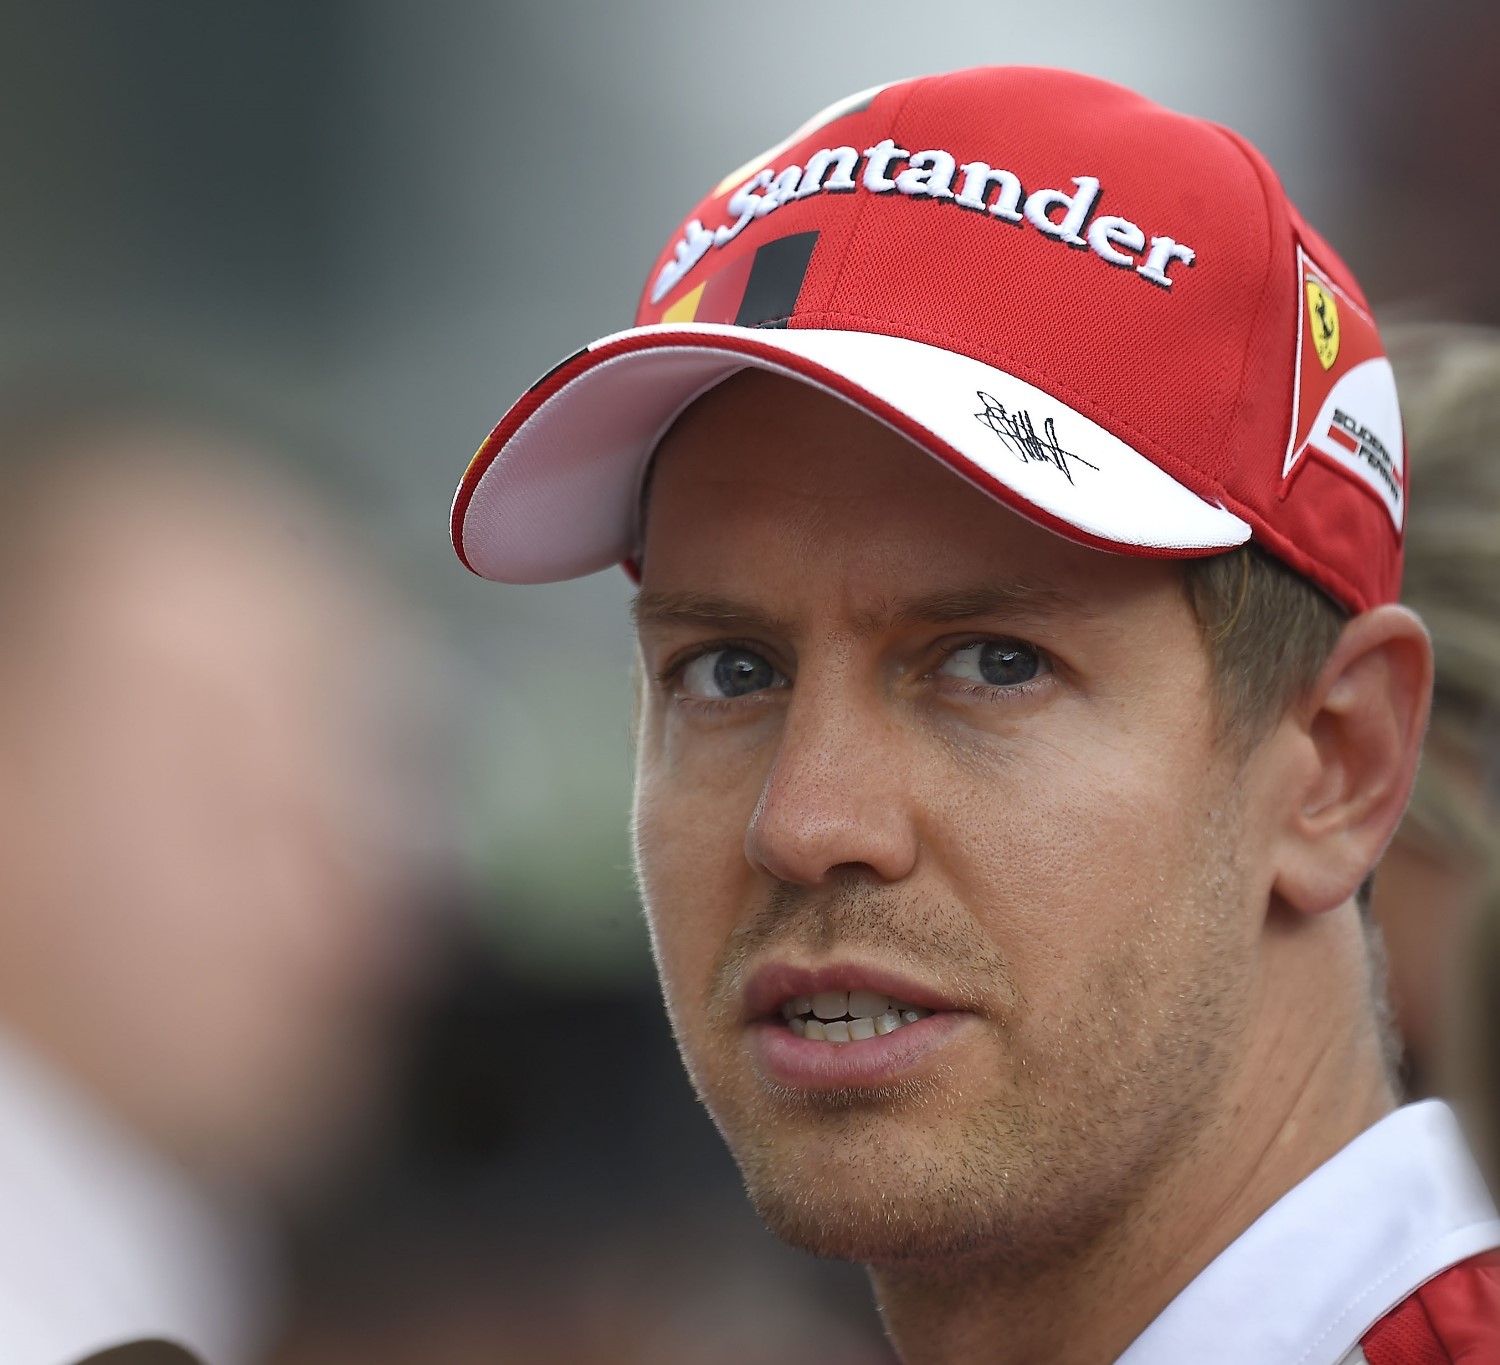 Does Vettel now risk retiring in the race with Transmission failure?